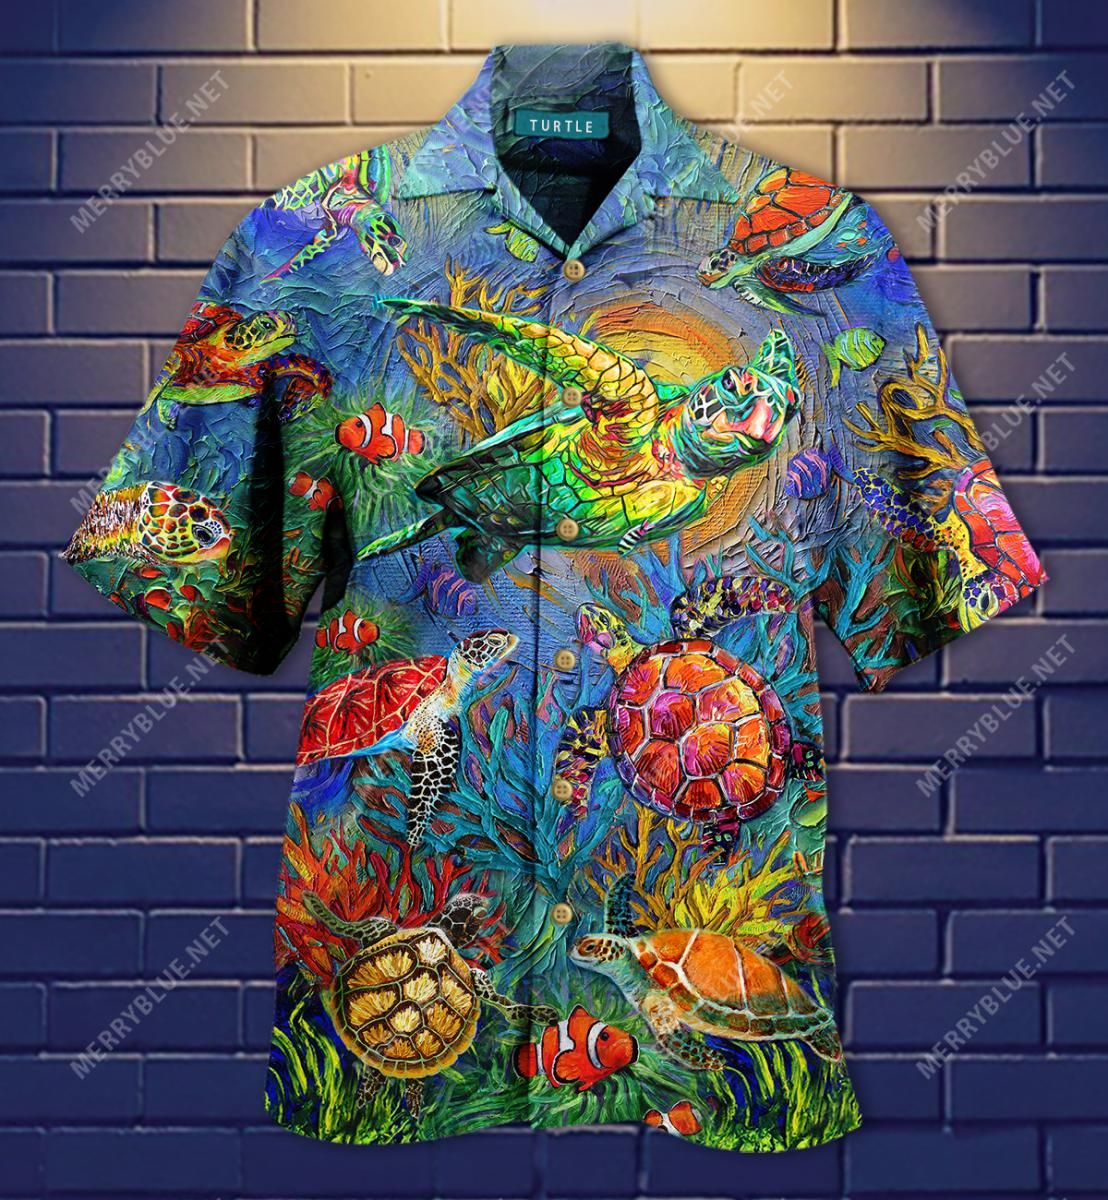 Have A Turtley Awesome Day Aloha Hawaiian Shirt Colorful Short Sleeve Summer Beach Casual Shirt For Men And Women